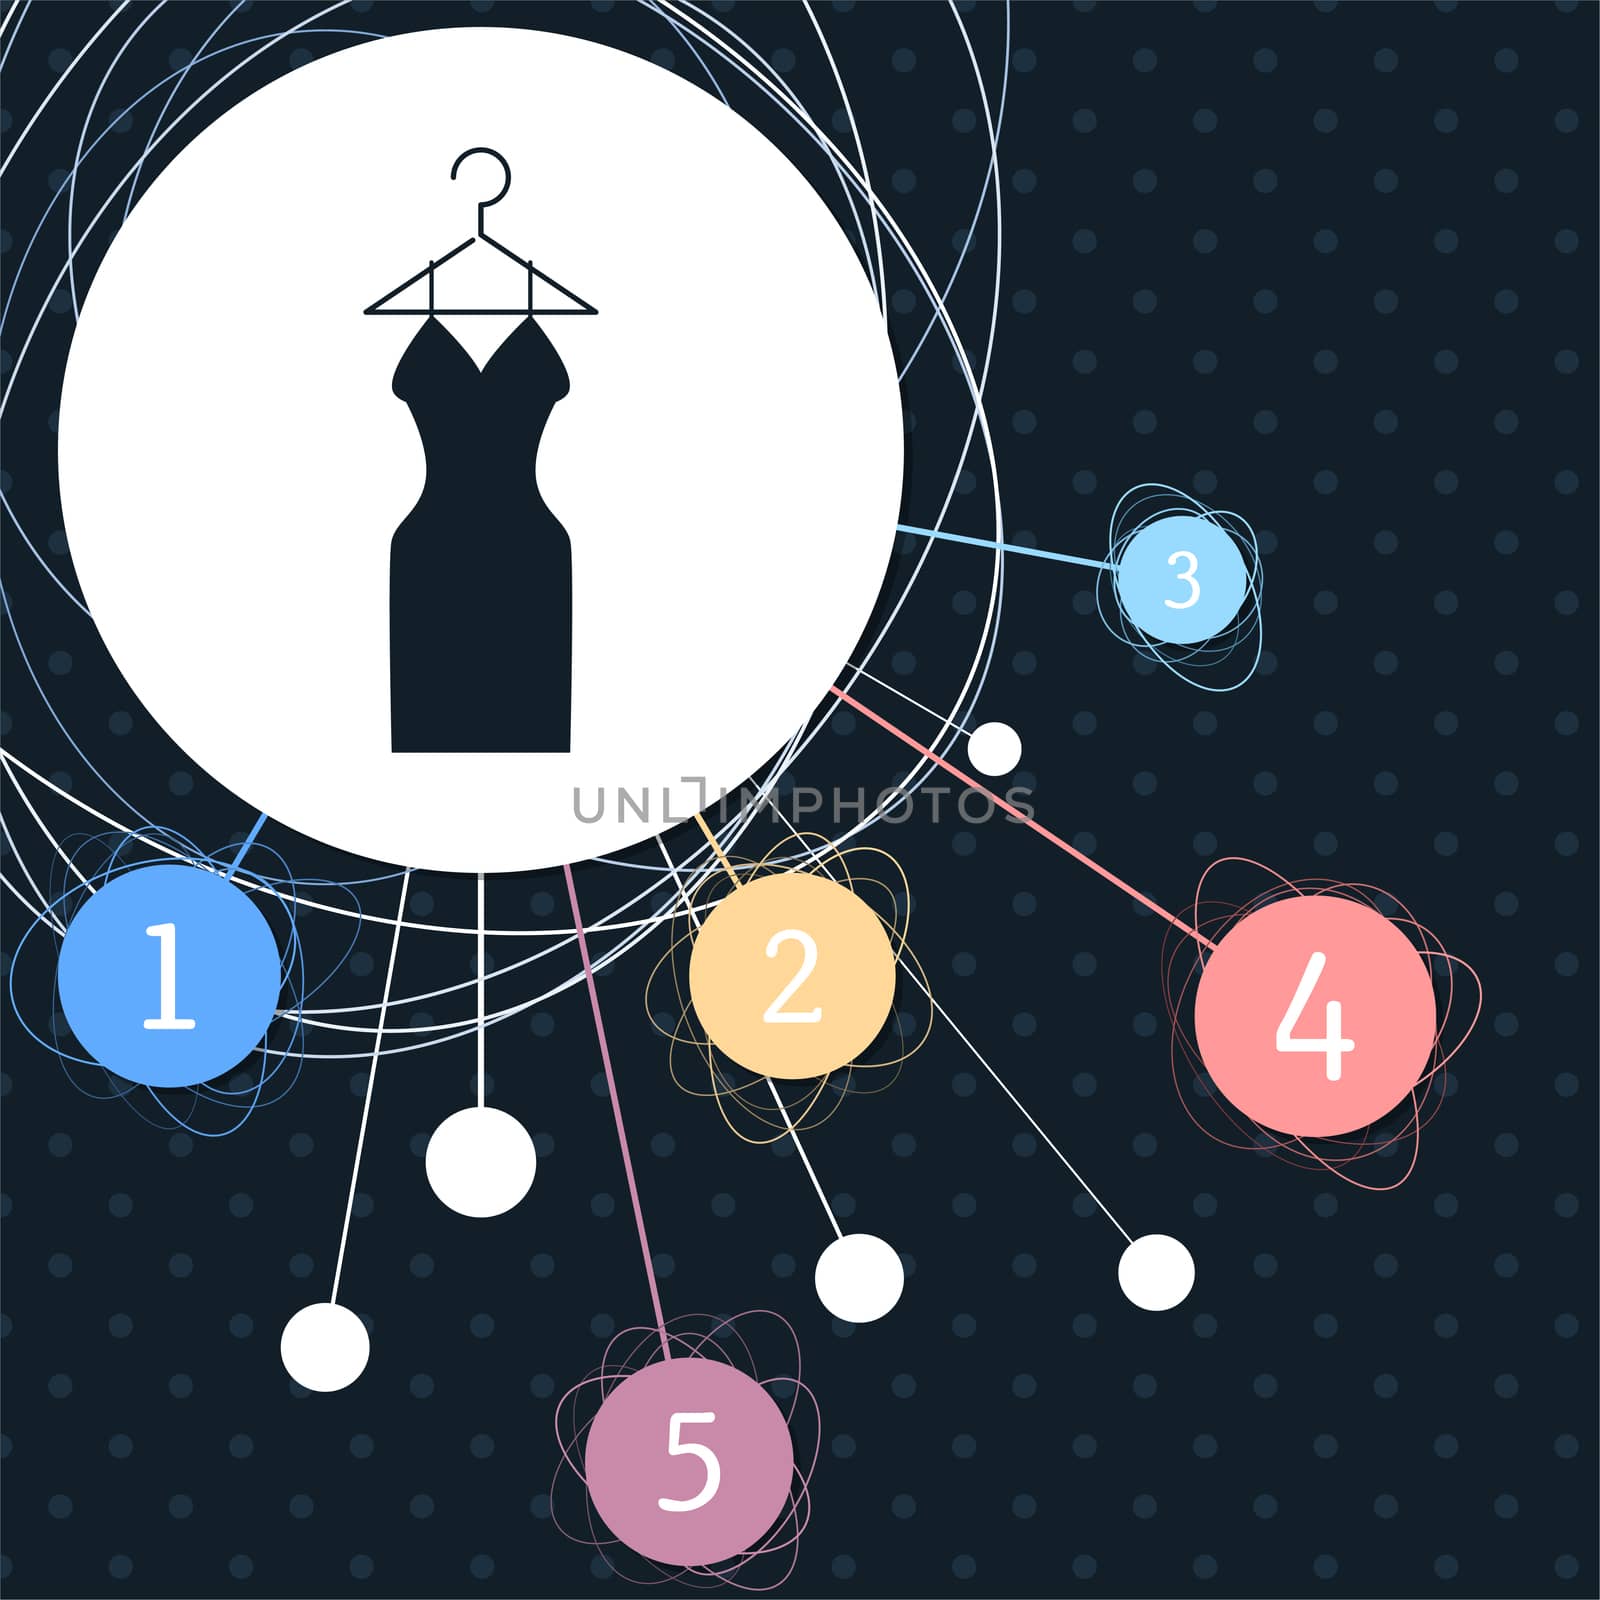 Dress Icon with the background to the point and with infographic style. illustration